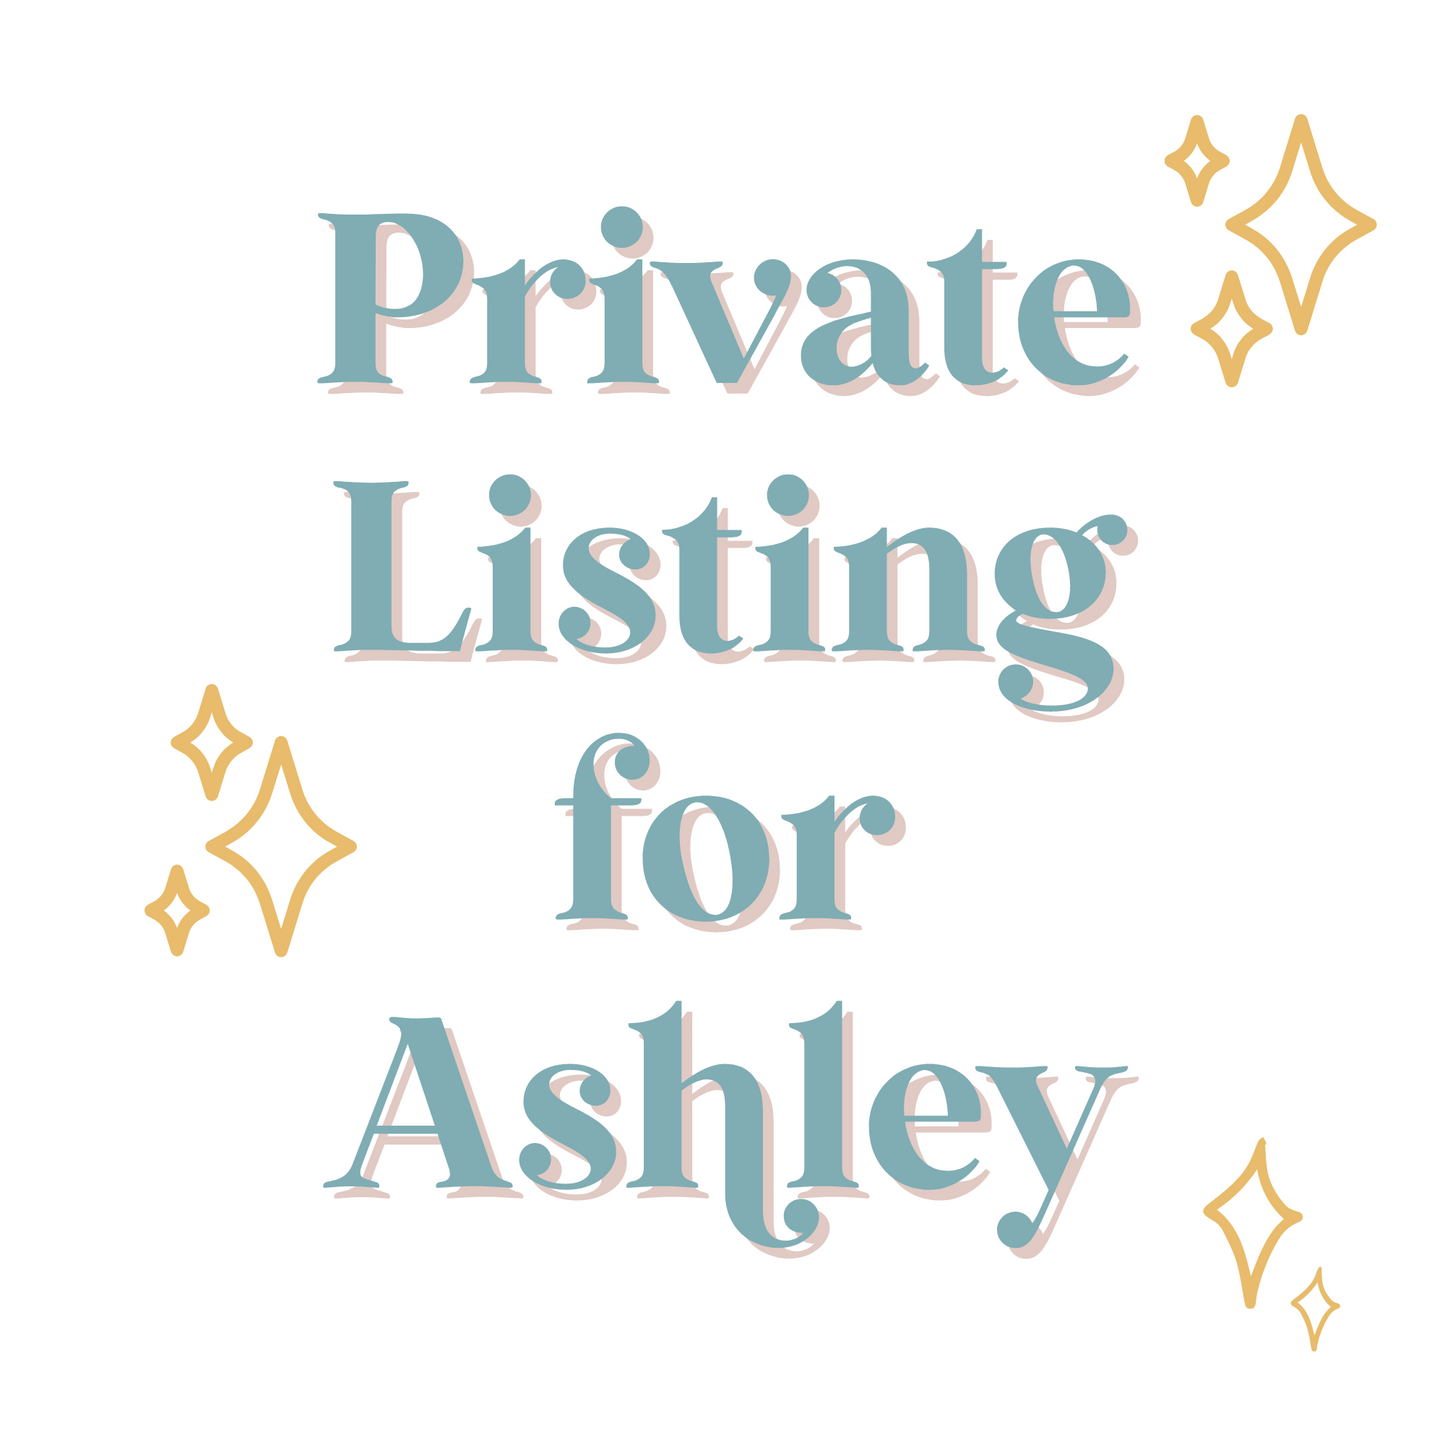 Private Listing for Ashley